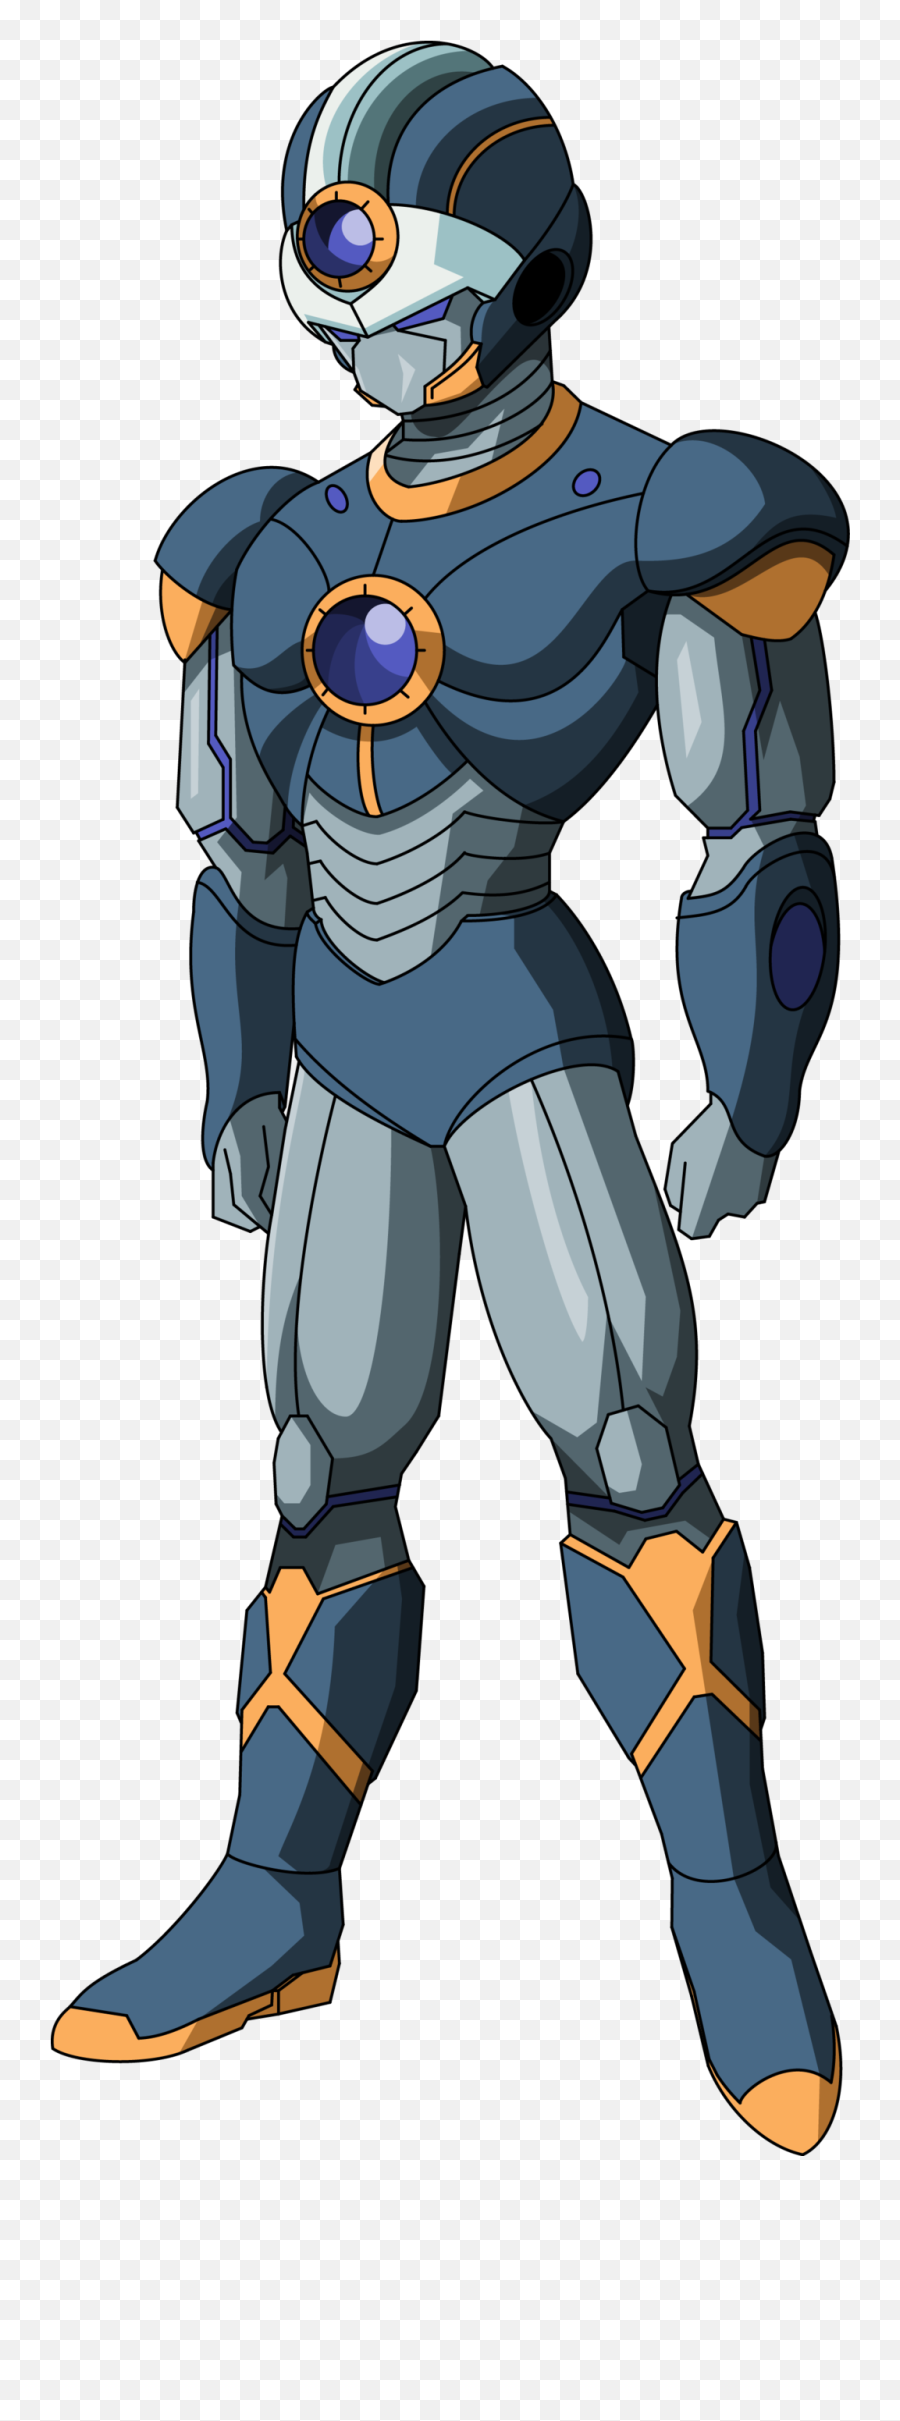 Frieza Png - 40337798 Cartoon 2585246 Vippng Fictional Character,Frieza Transparent